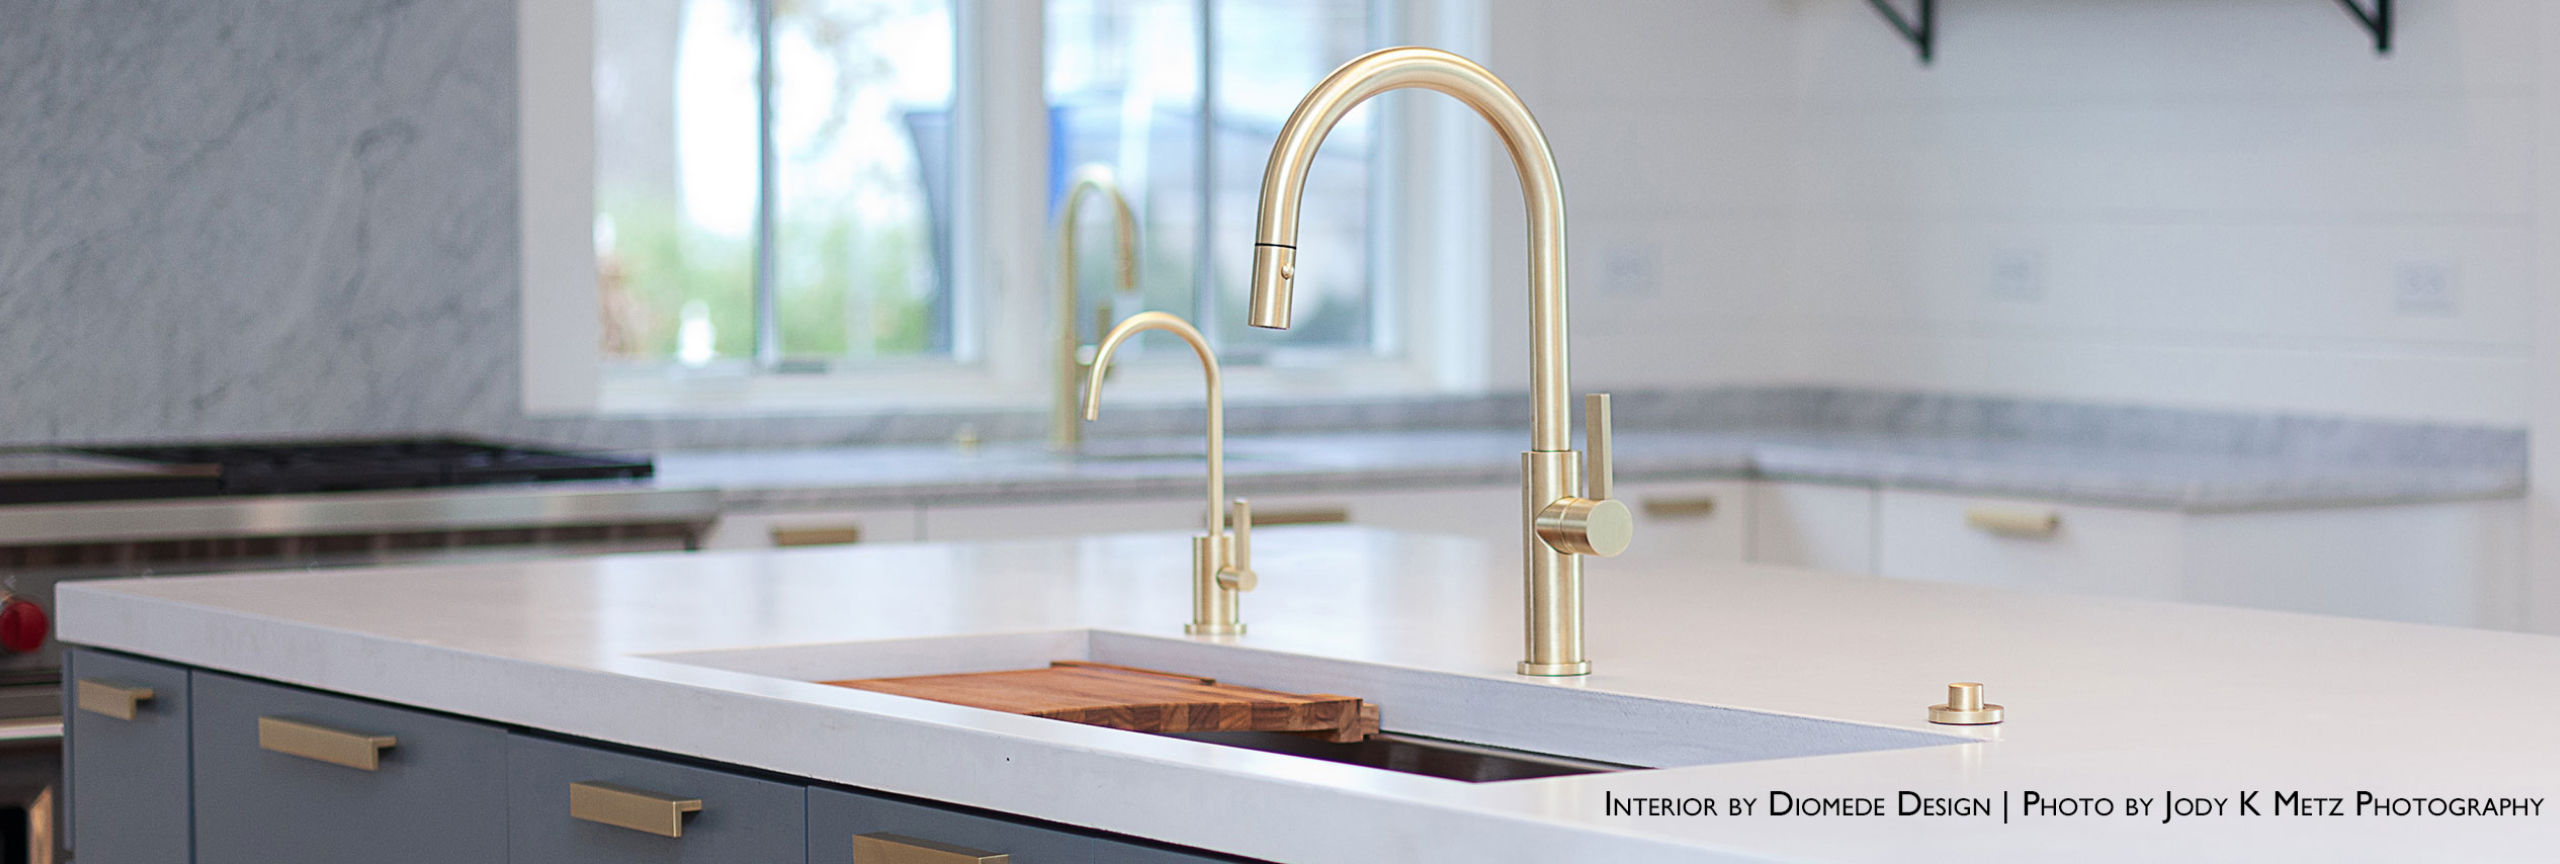 Corsano series kitchen faucet and accessories in satin brass